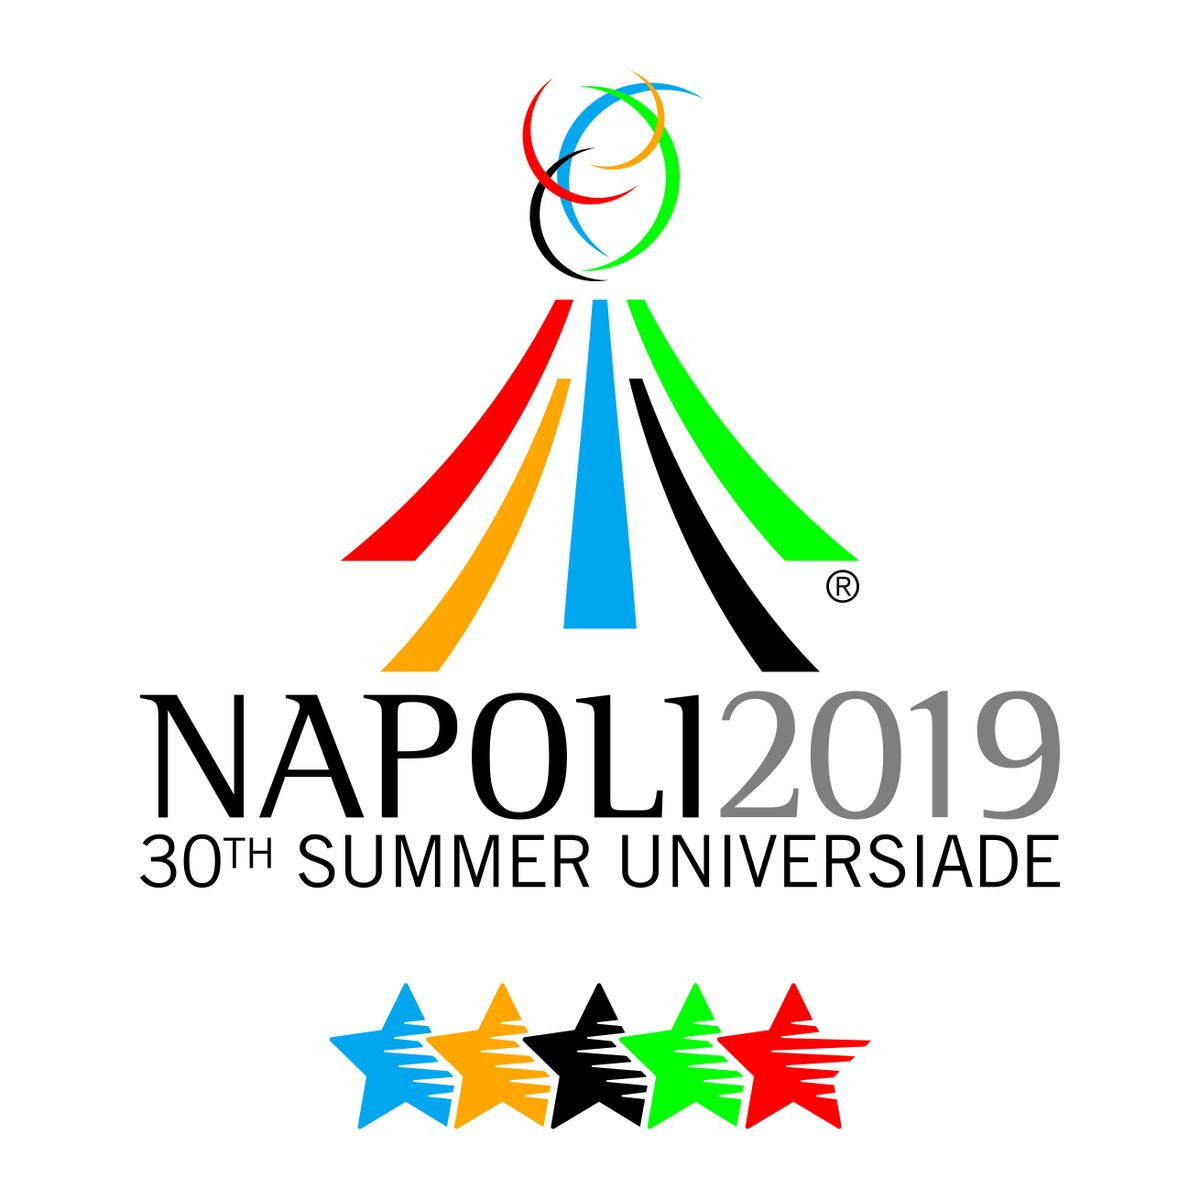 The Napoli 2019 Summer Universiade and Italian sport federations have reached an agreement to move on to the operative phase of the sporting event ©FISU